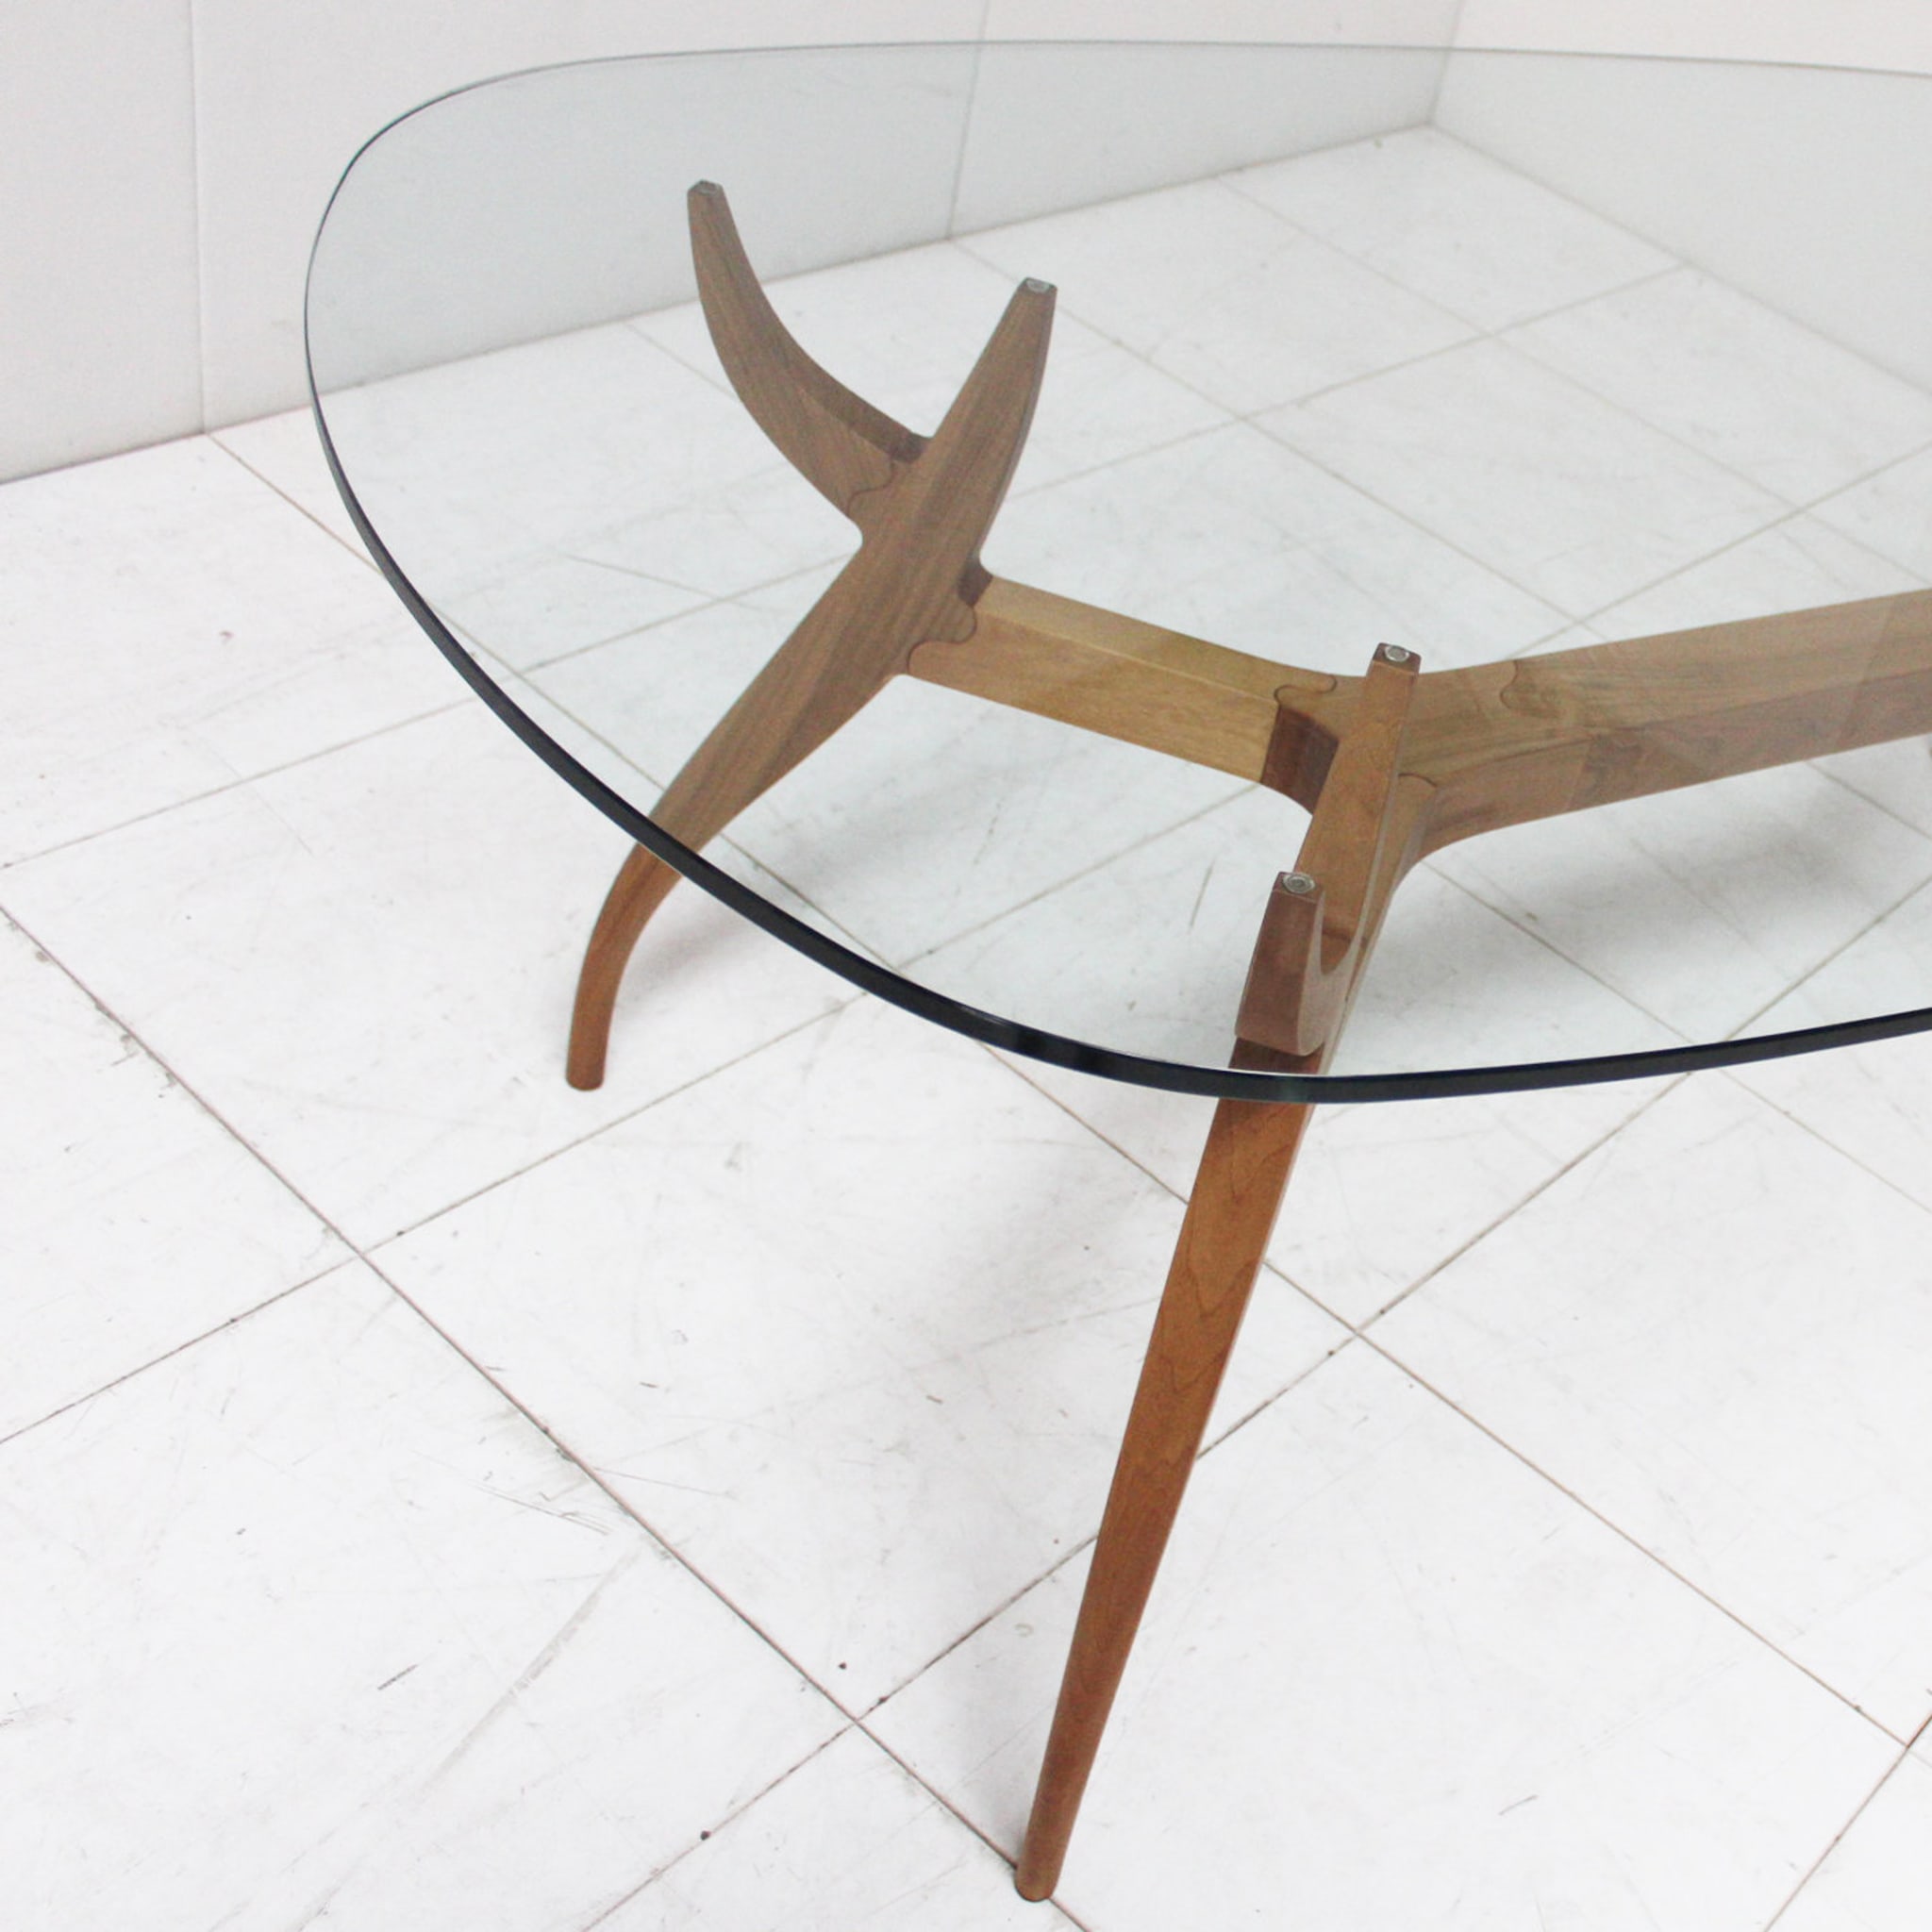 Stag Dining Table By Nigel Coates - Alternative view 1